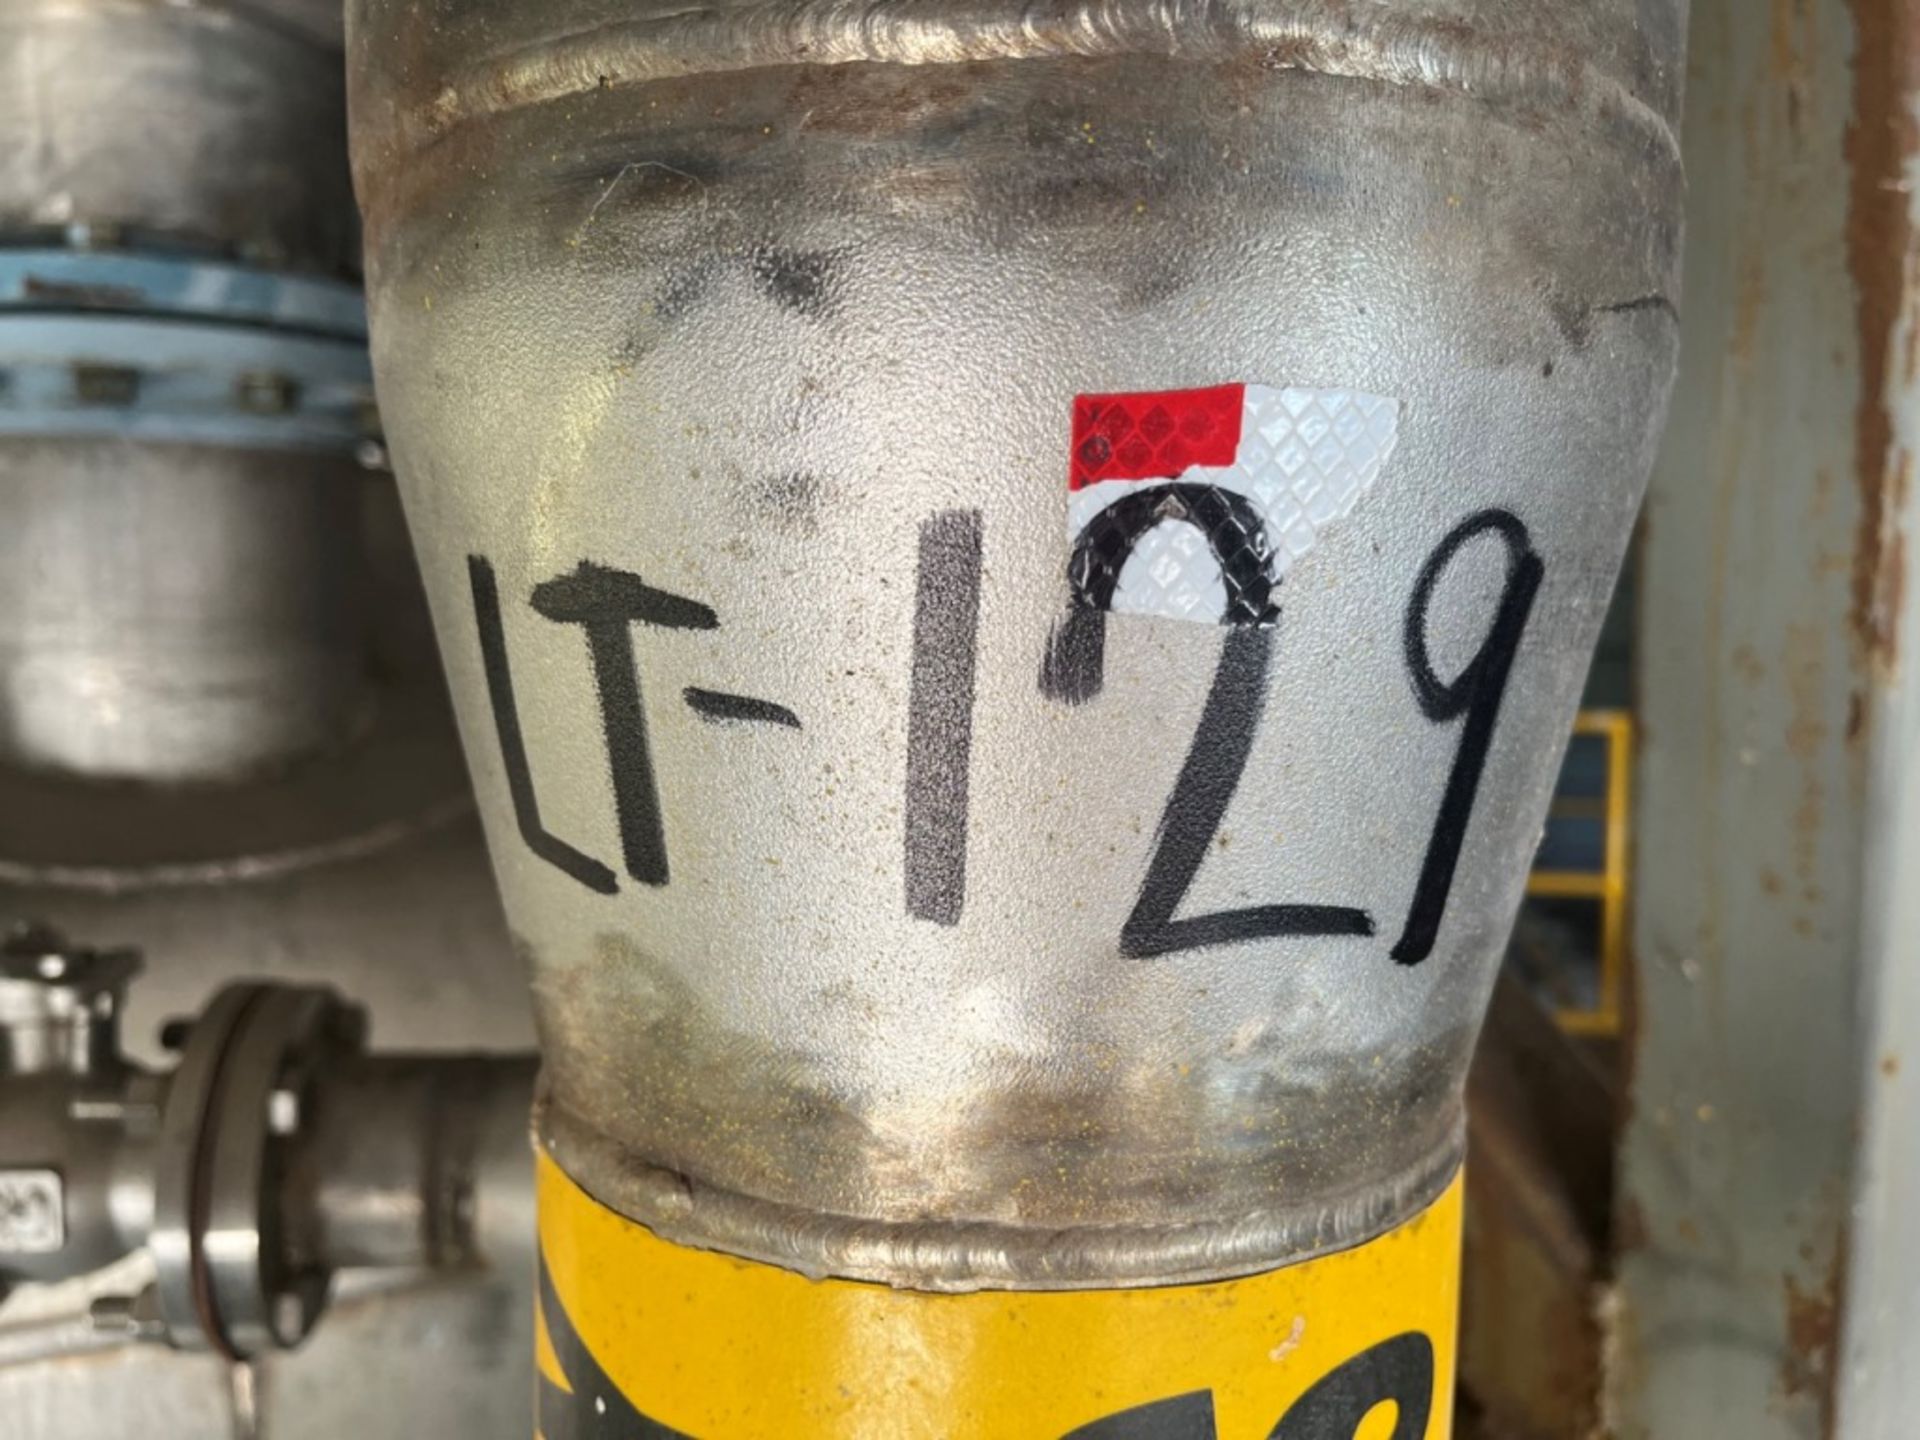 Lot of stainless steel pipe includes: Approximately 100 linear meters of 3 1/2" pipe - Bild 37 aus 47